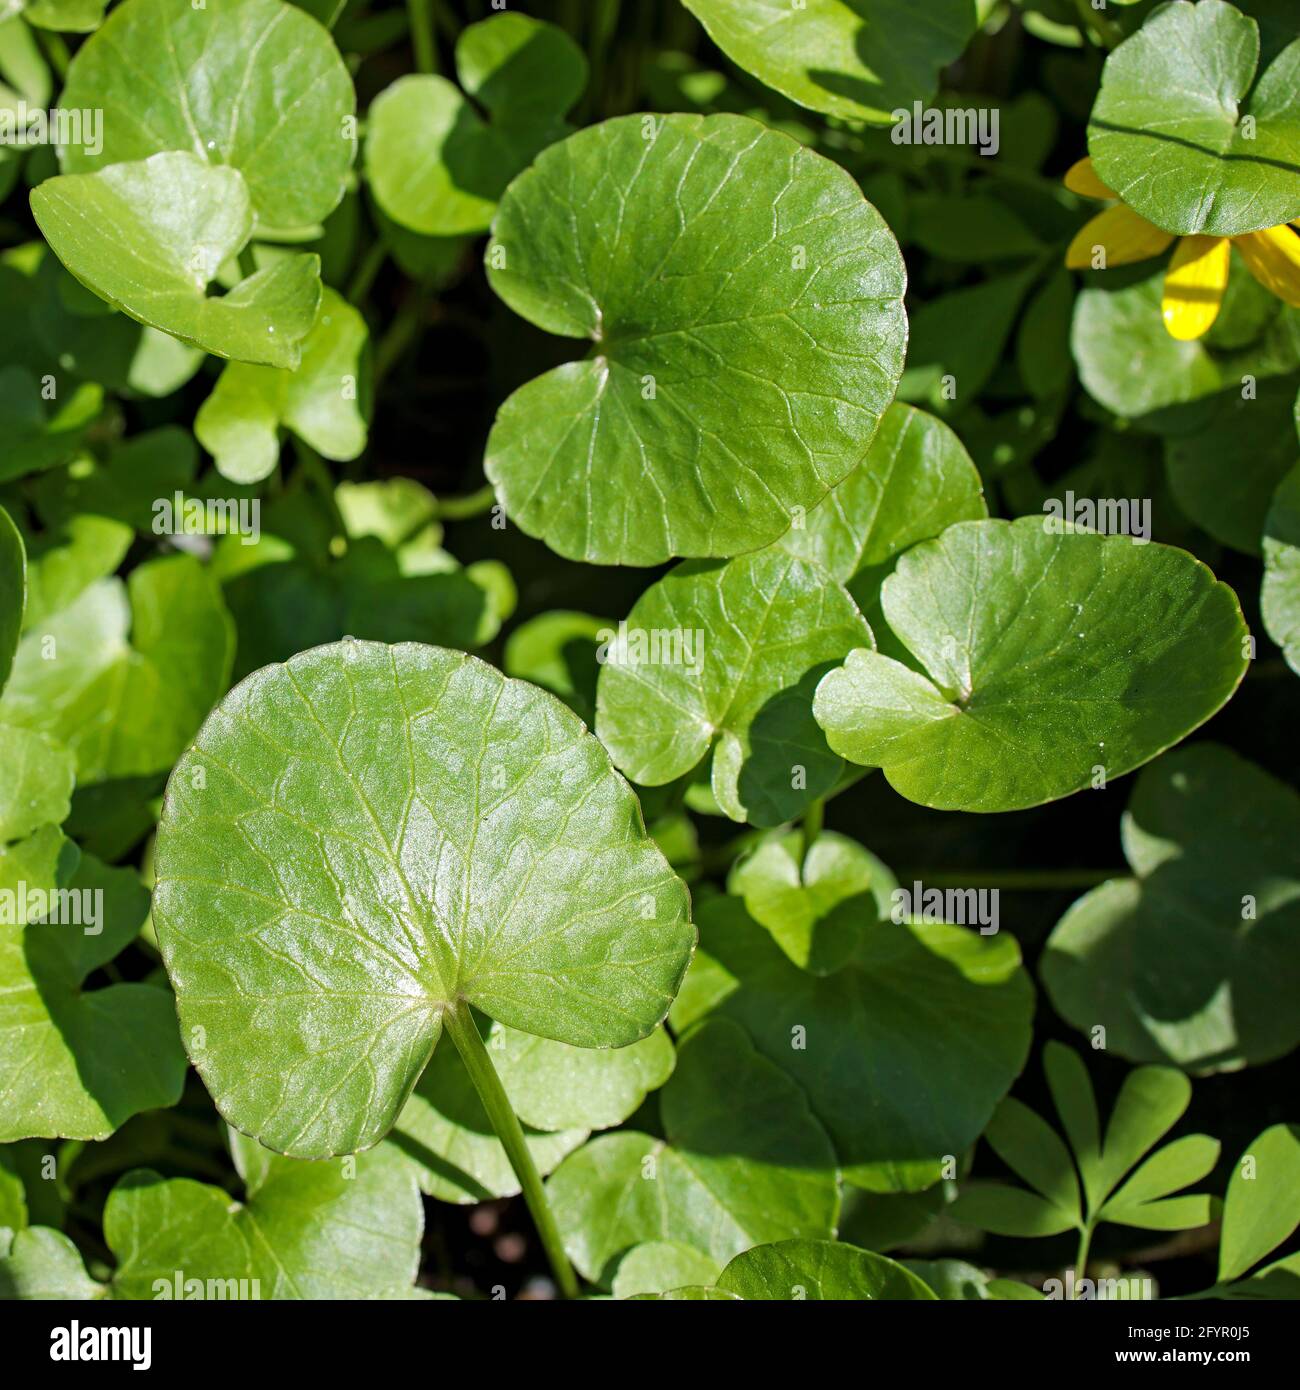 Asarum europaeum, commonly known as asarabacca, European wild ginger, hazelwort, and wild spikenard, is a species of flowering plant in the birthwort Stock Photo